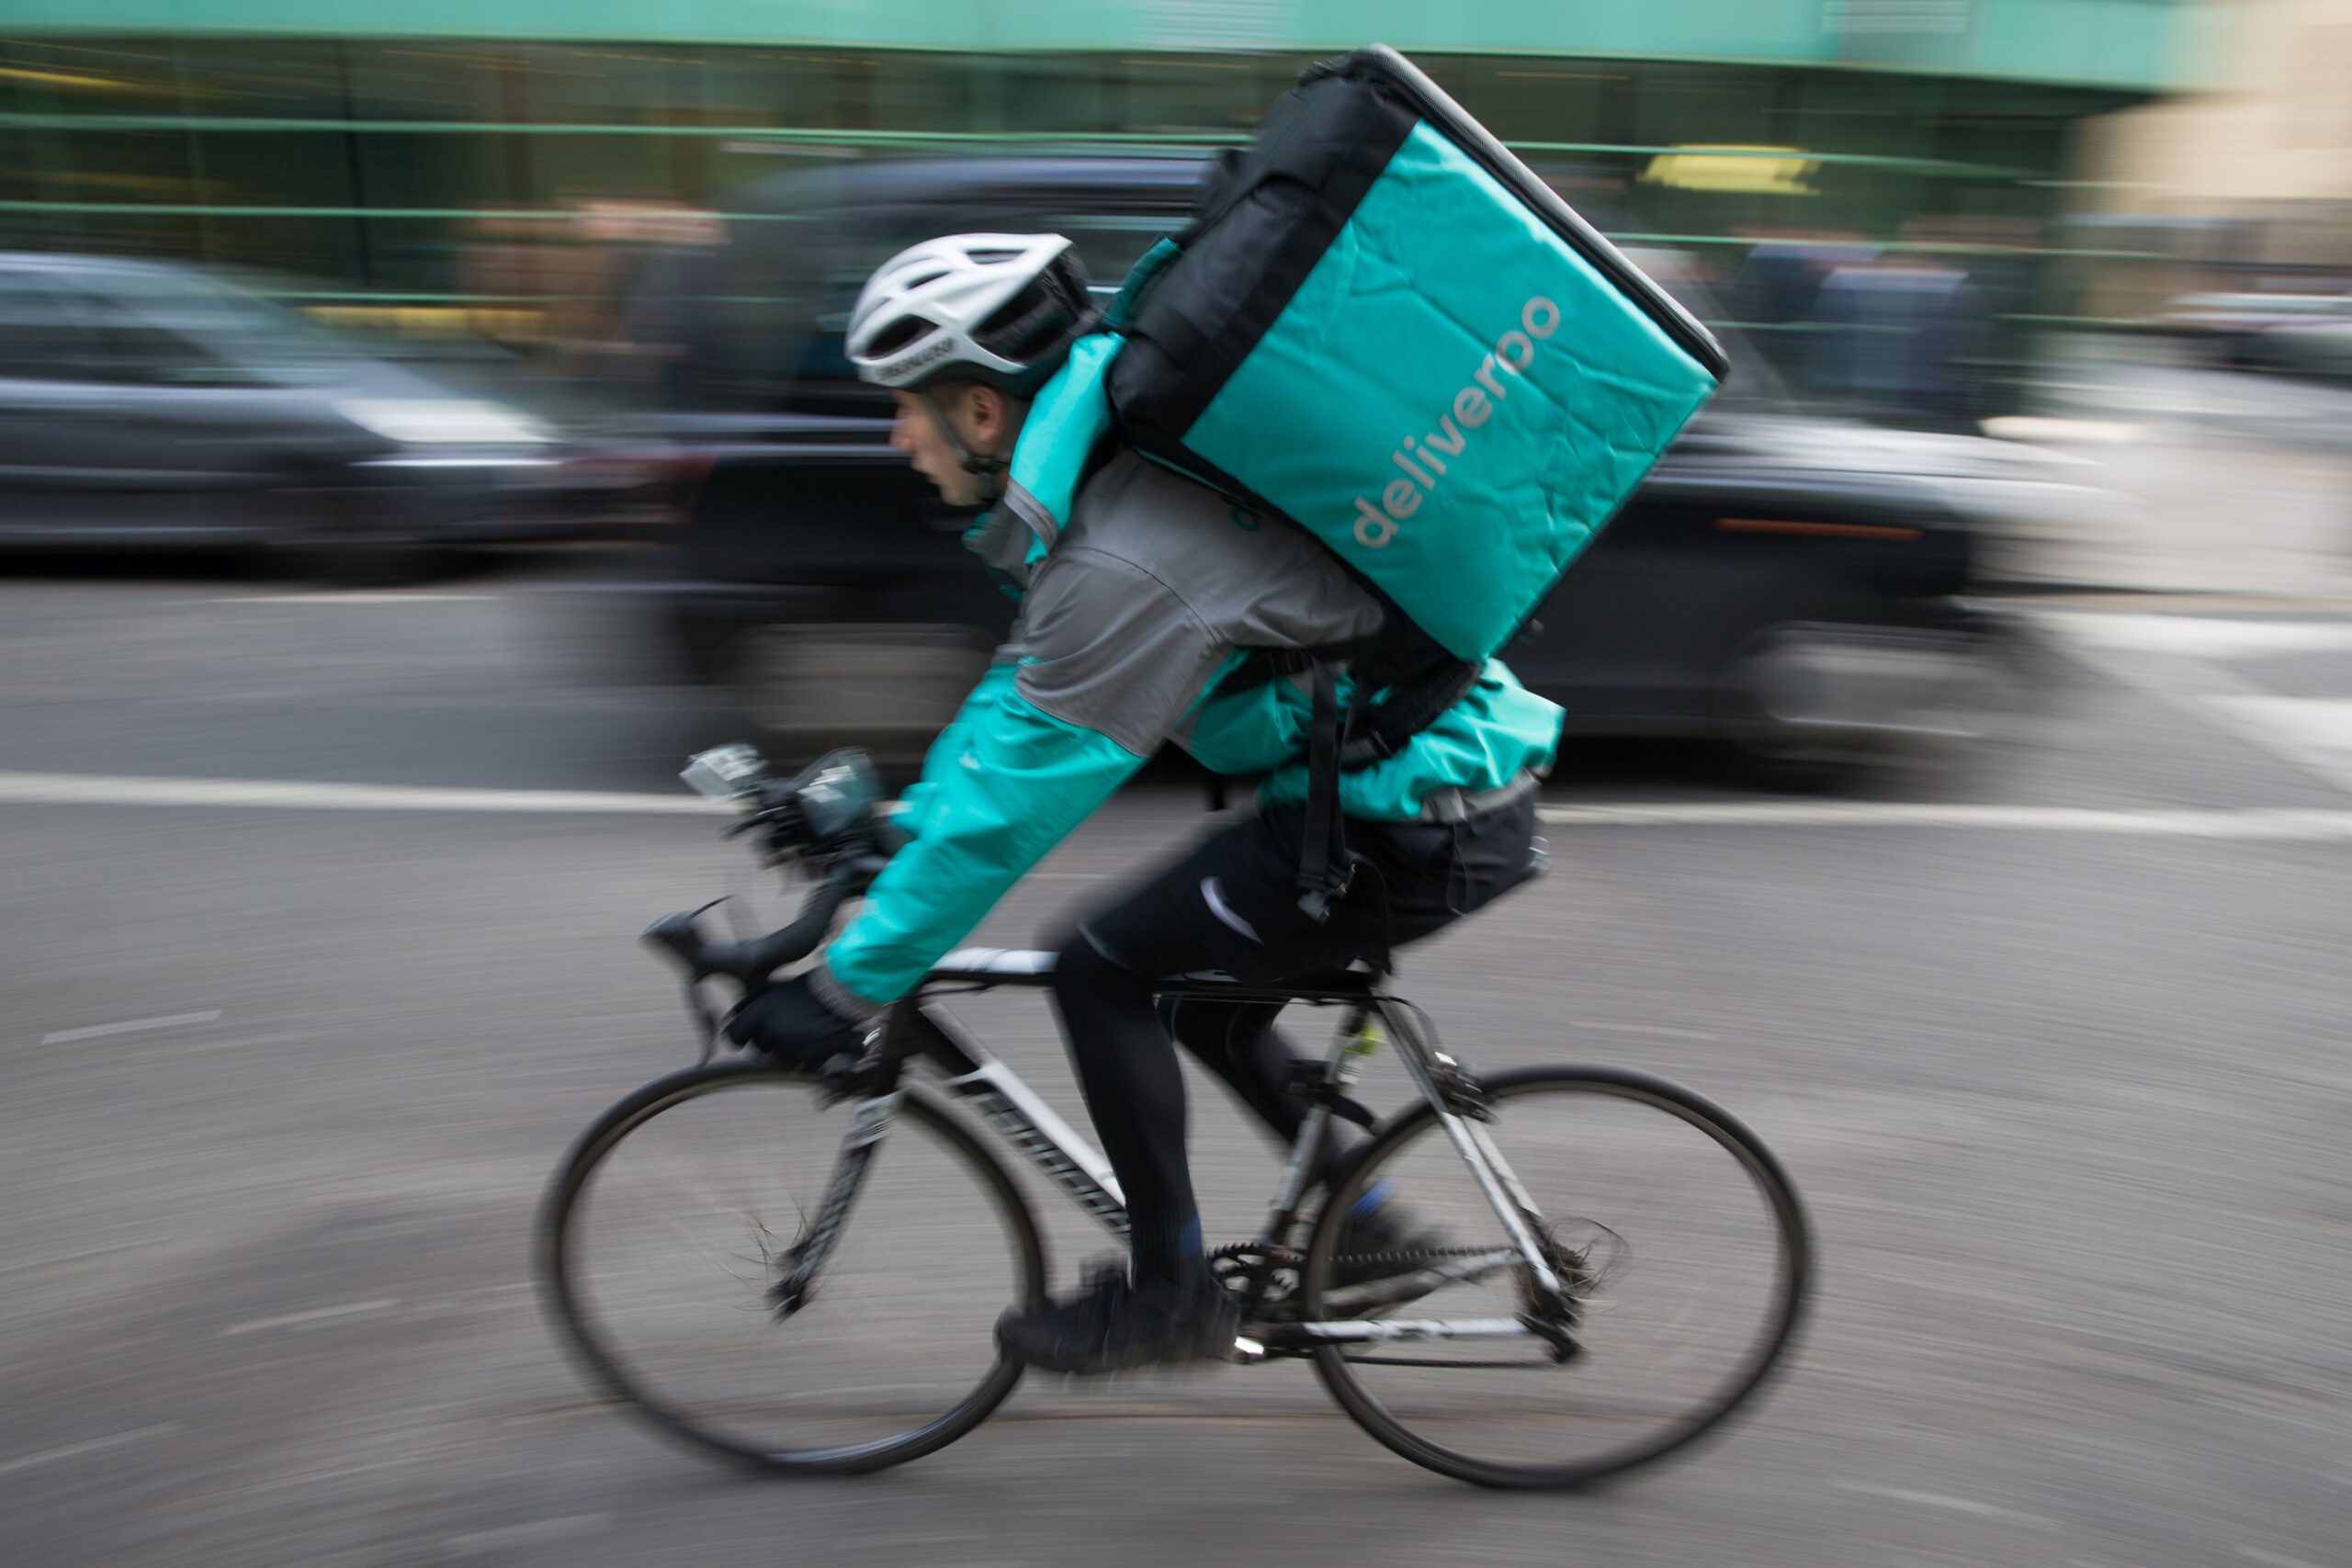 How restaurants can launch effective delivery services